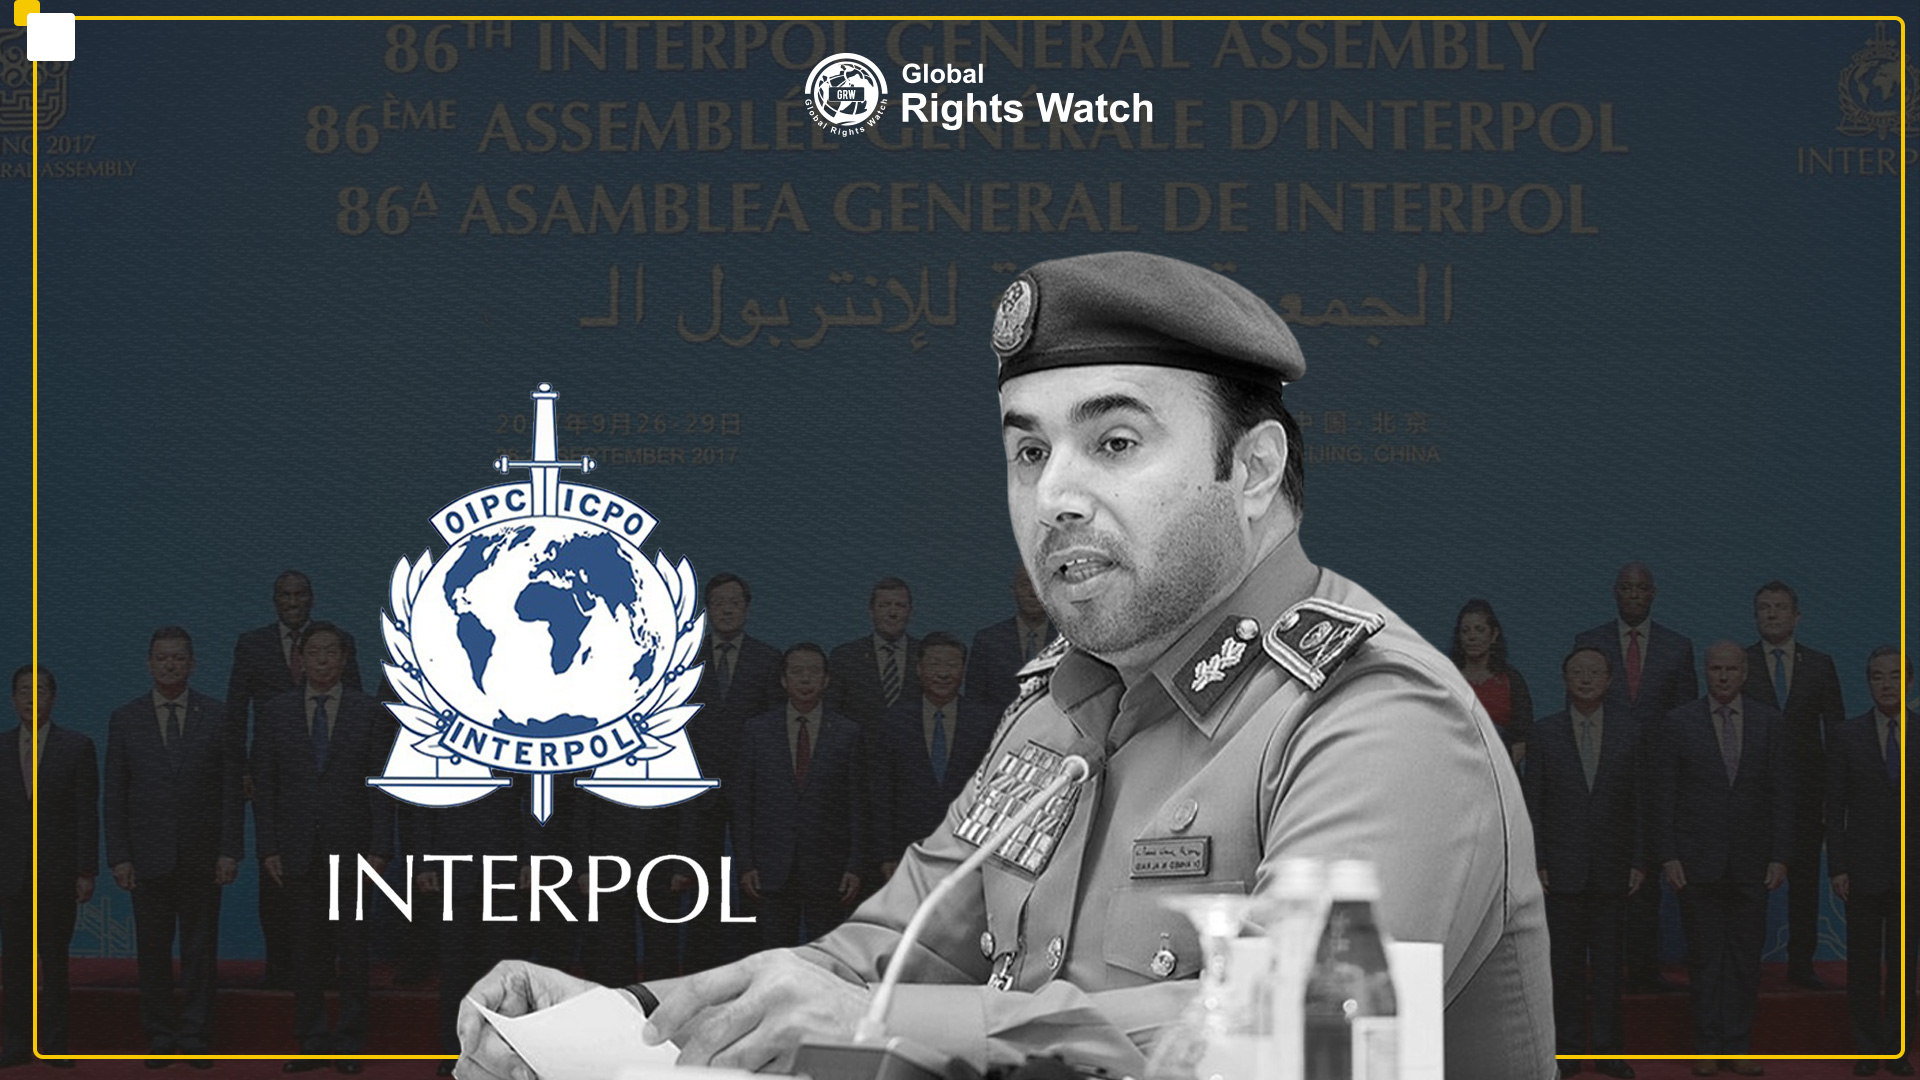 Online Seminar Rejecting the Candidacy of Former UAE Security Personnel for the Head of Interpol